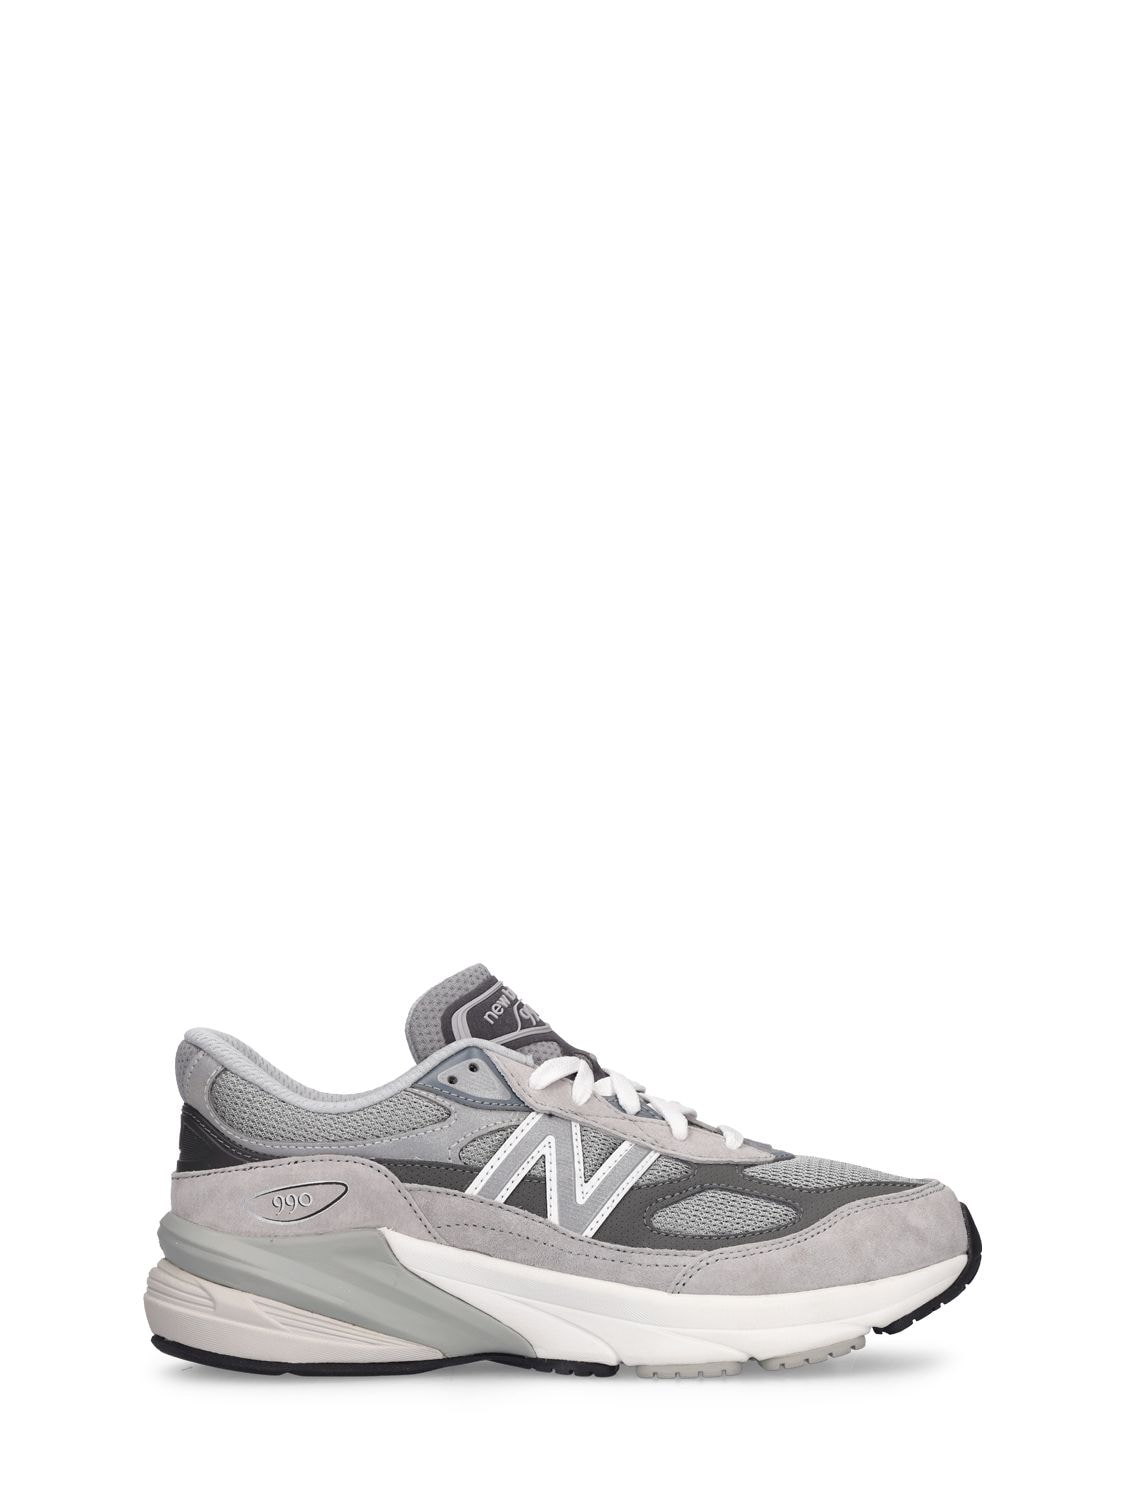 NEW BALANCE 990 LEATHER & MESH LACE-UP SNEAKERS